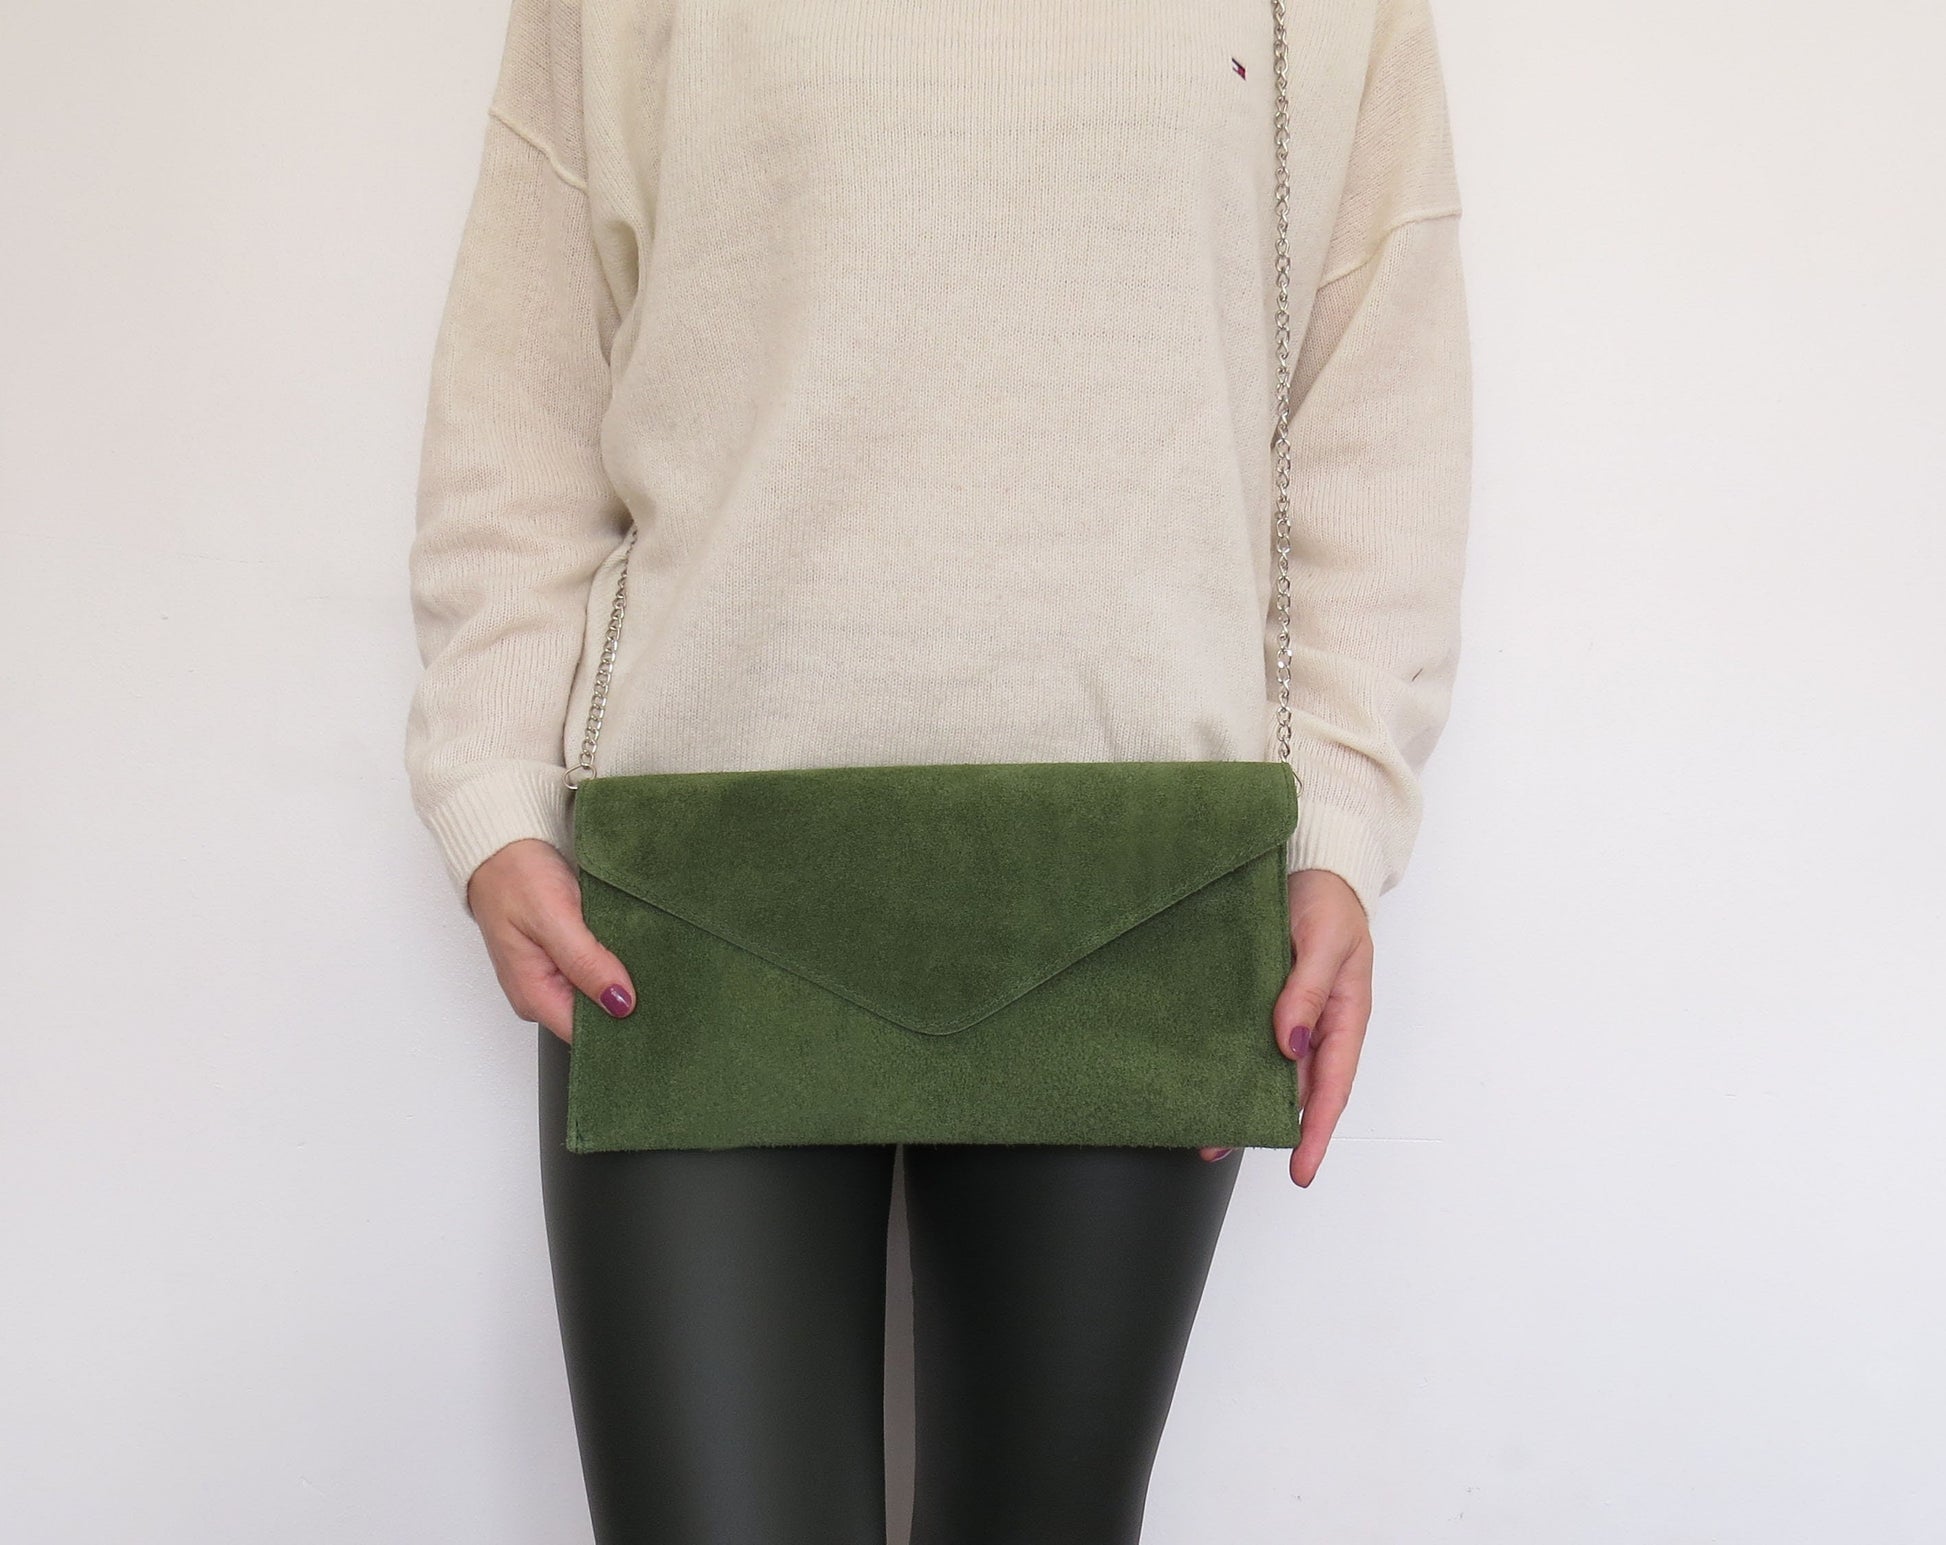 Olive Green envelope clutch bag with chain strap